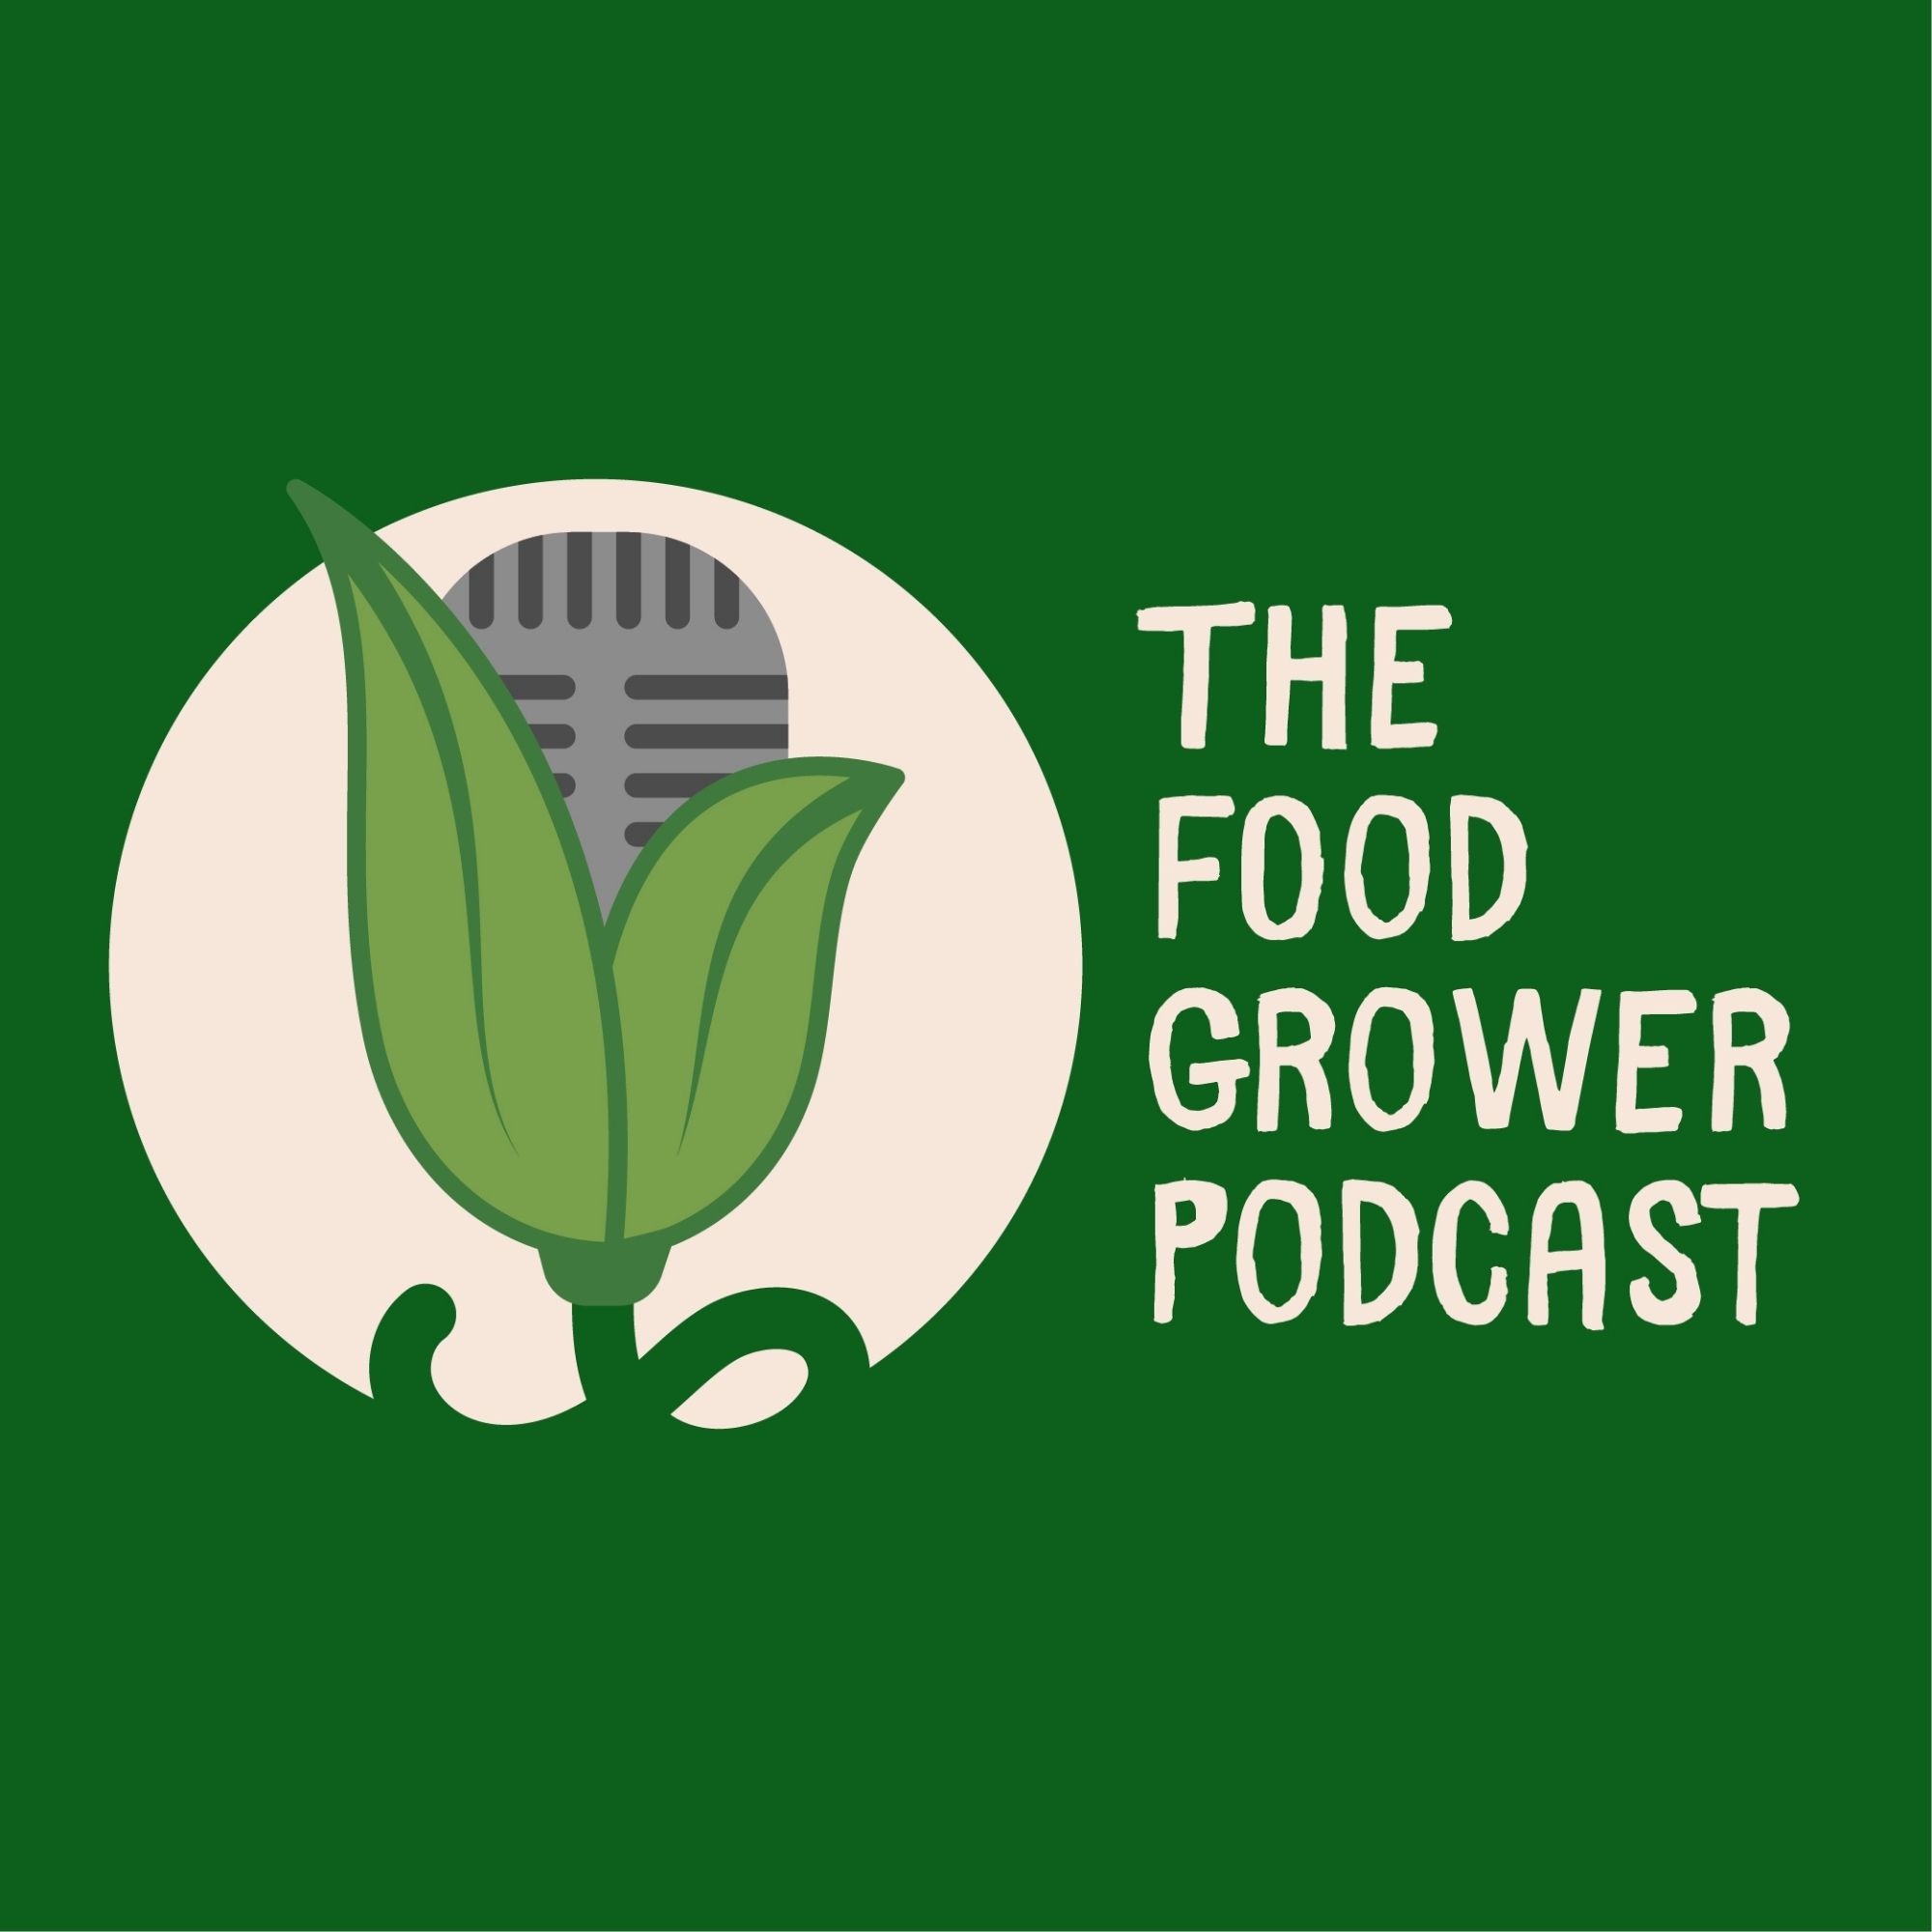 Artwork for The Food Grower Podcast